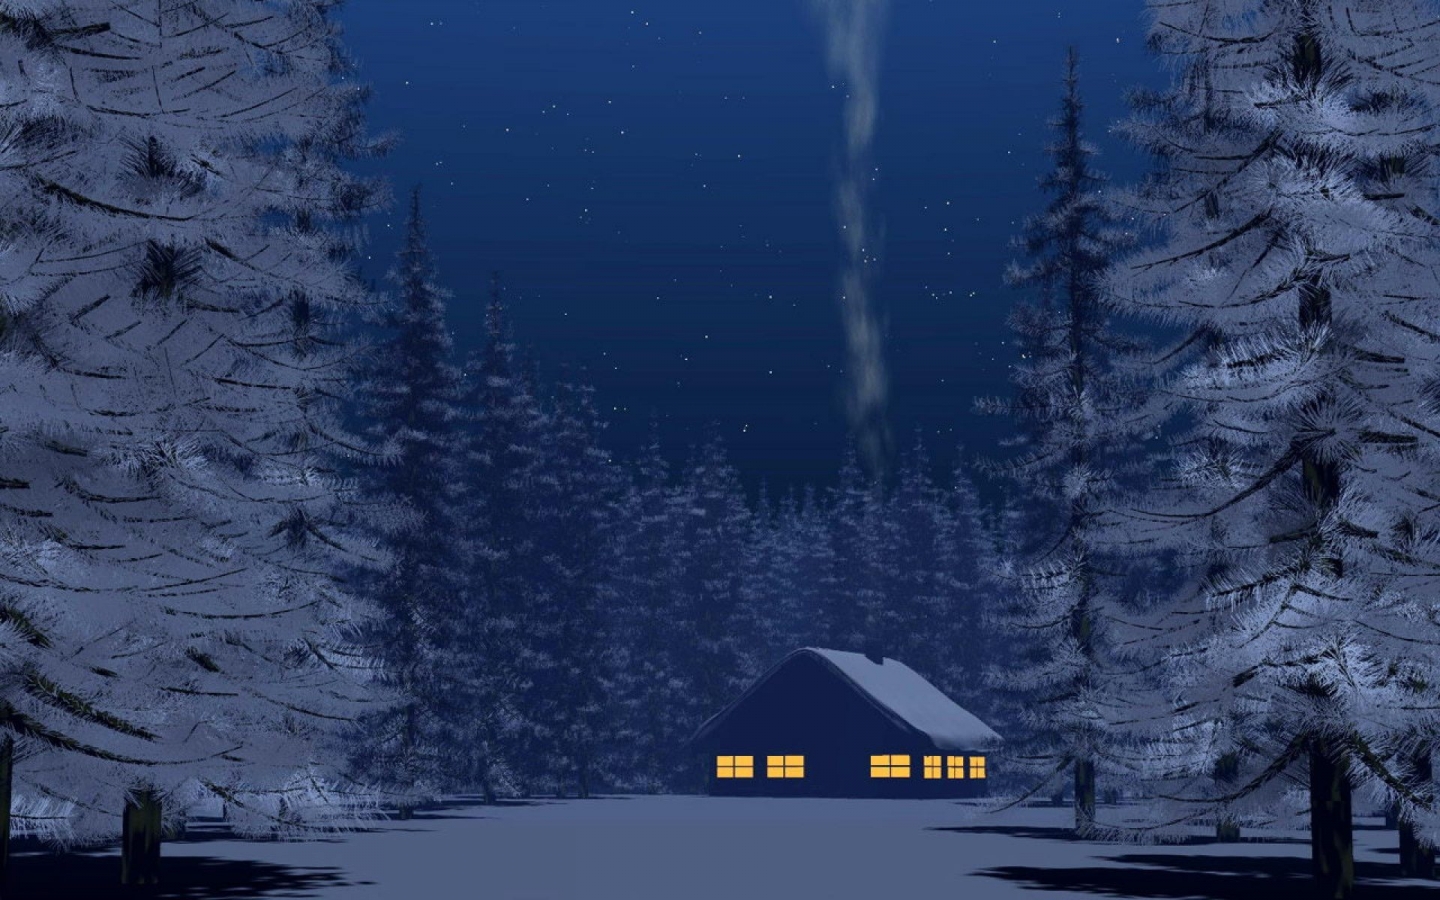 Winter Night Photos Download The BEST Free Winter Night Stock Photos  HD  Images